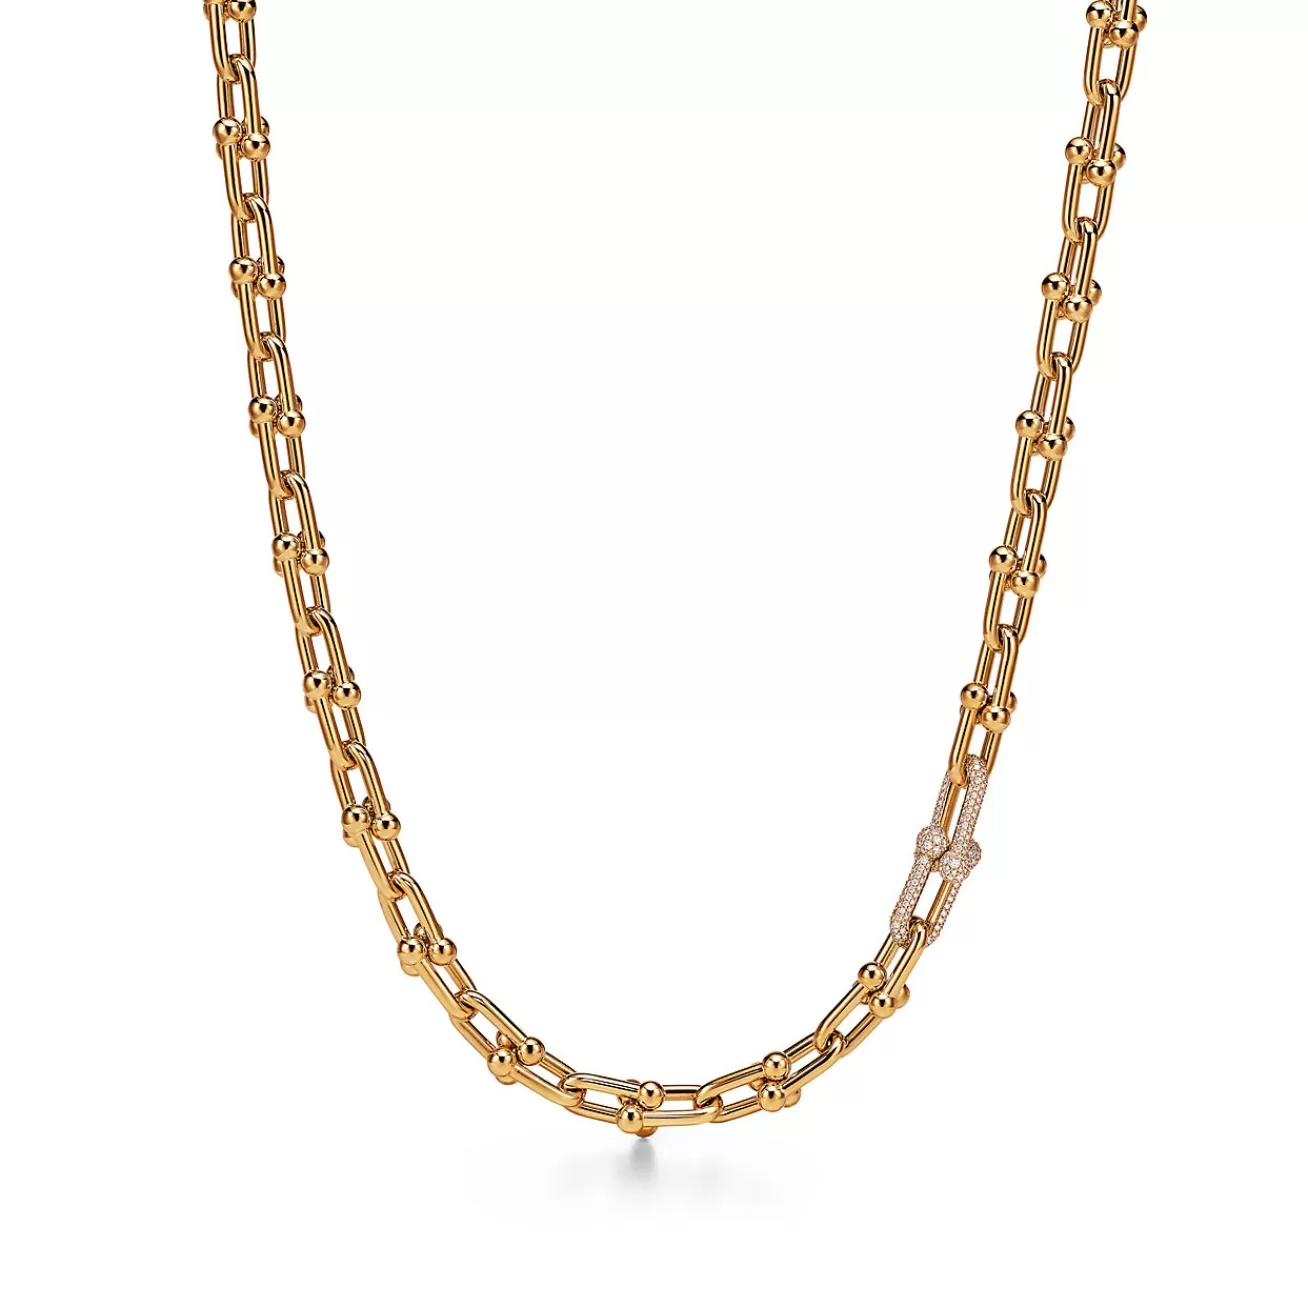 Tiffany & Co. Tiffany HardWear Medium Link Necklace in Yellow Gold with Diamonds | ^ Necklaces & Pendants | New Jewelry